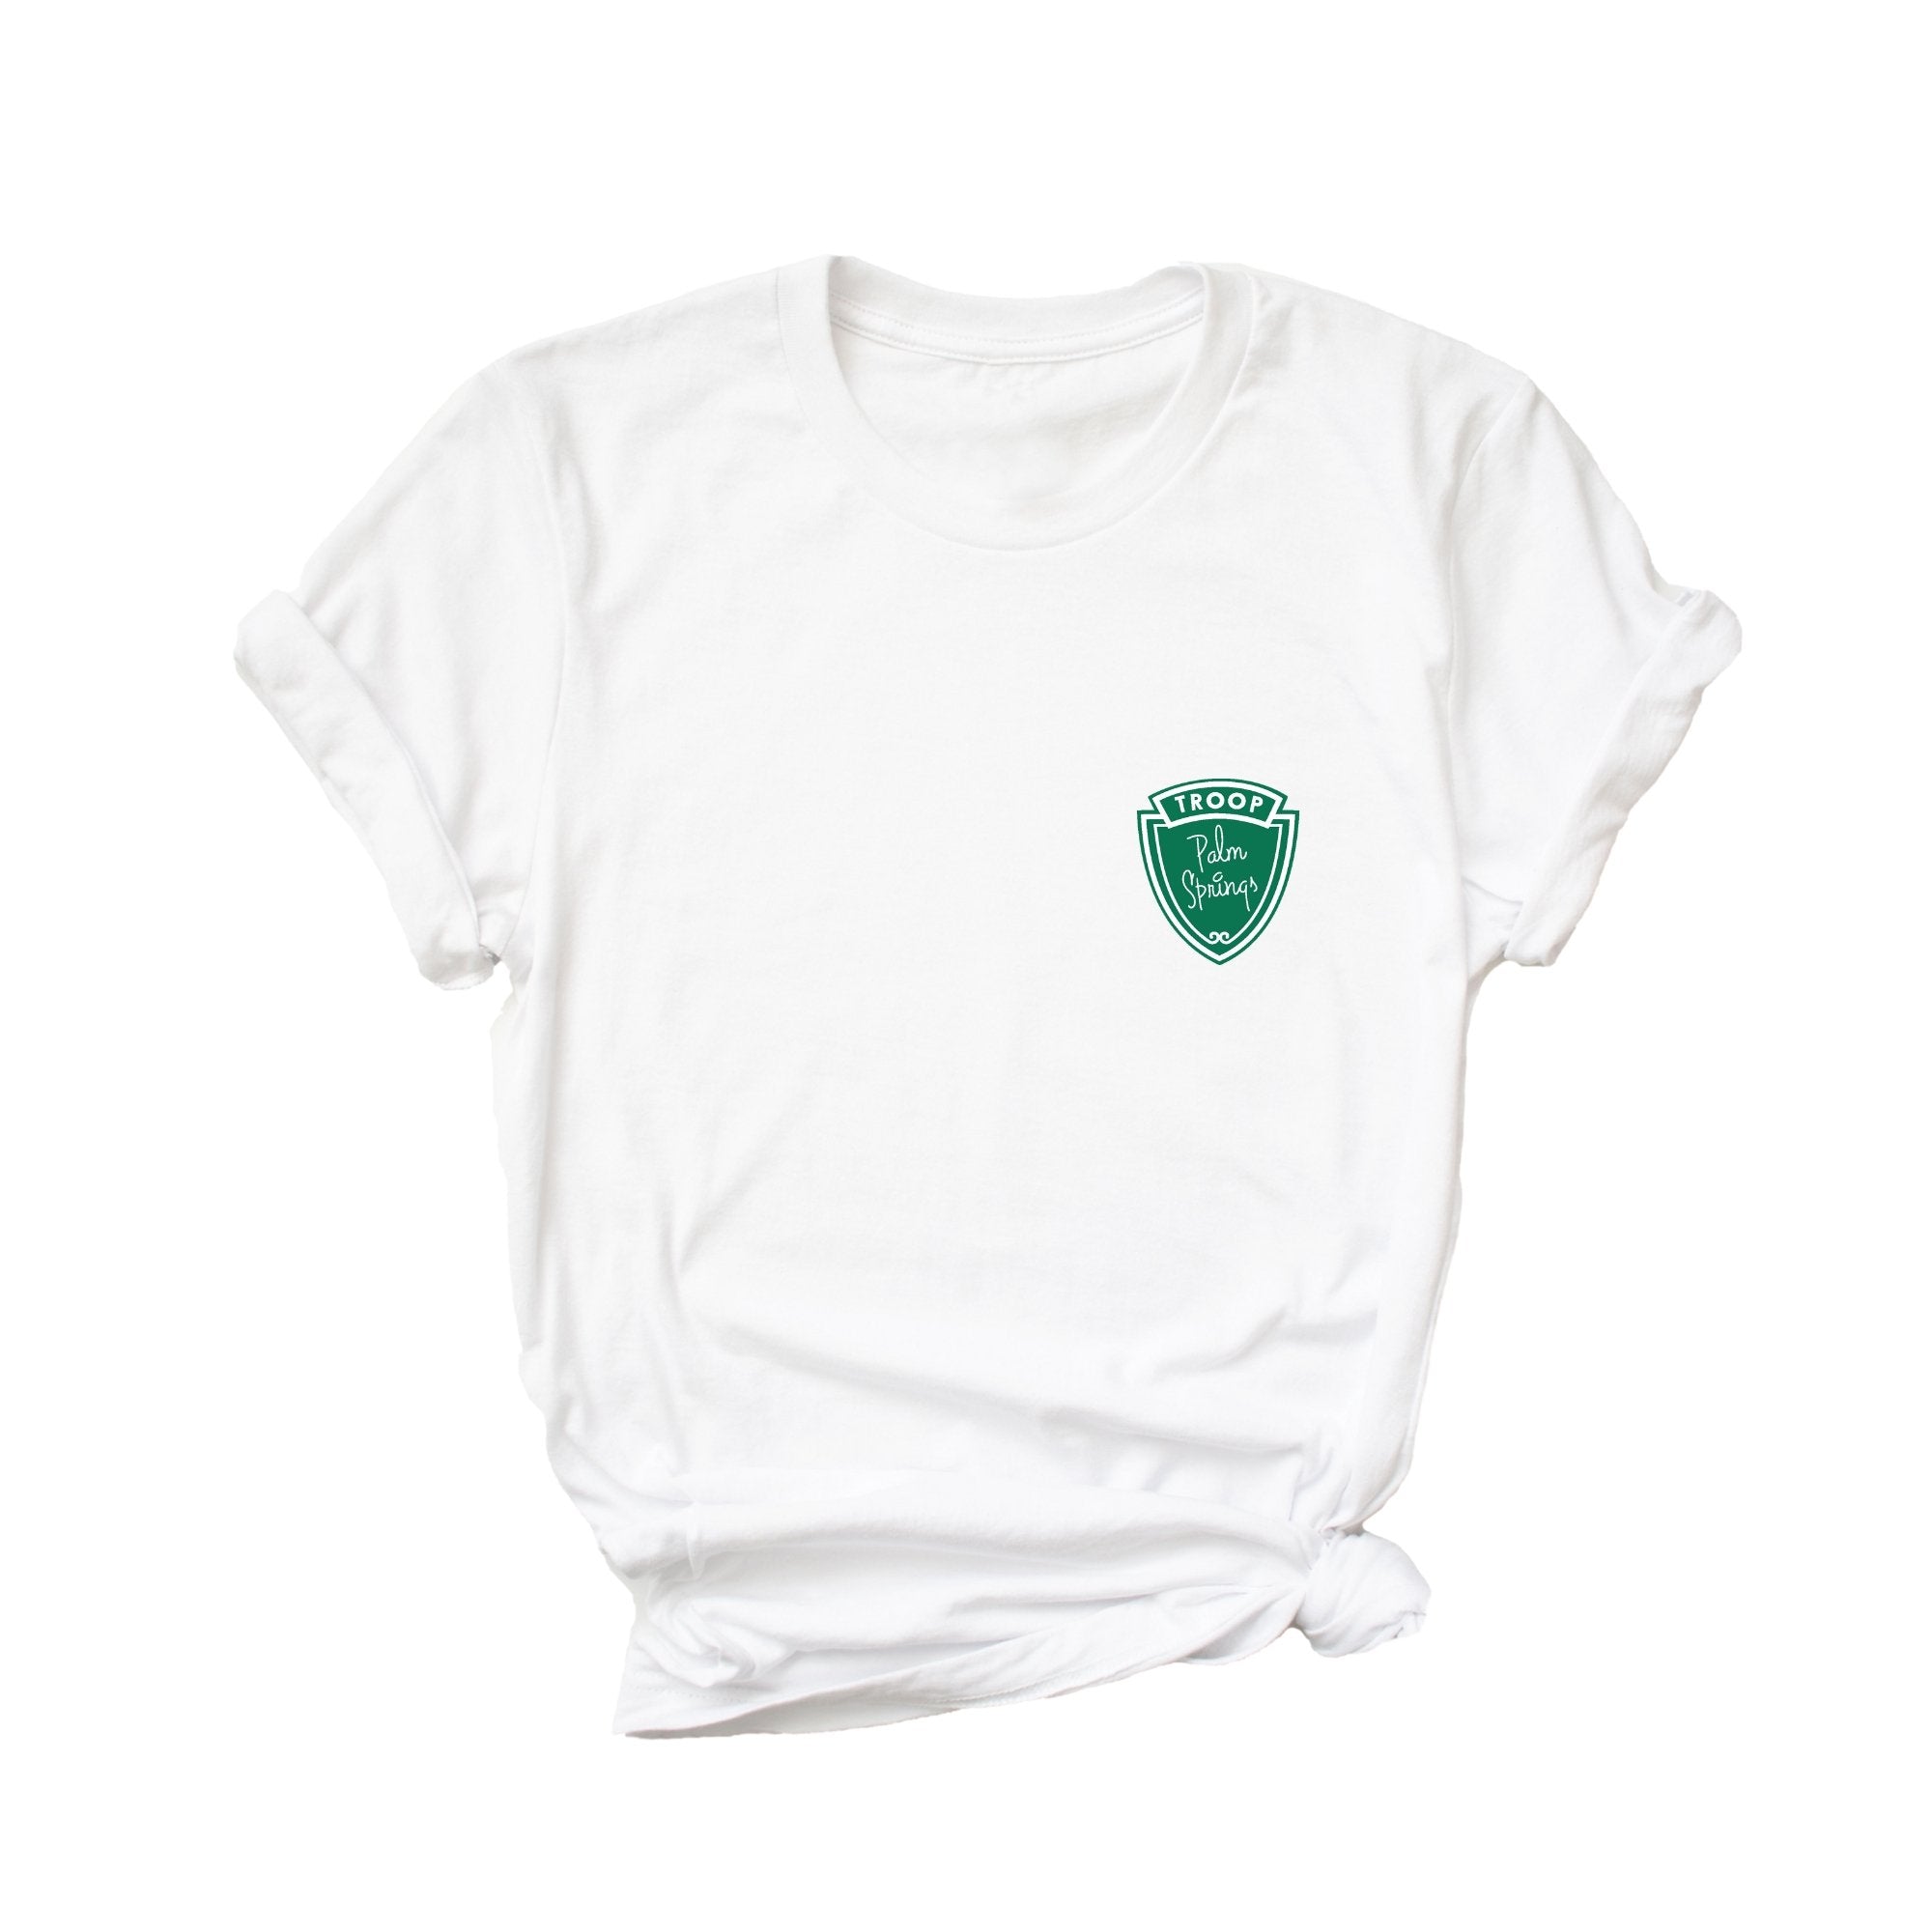 A white t shirt is customized with a green troop logo